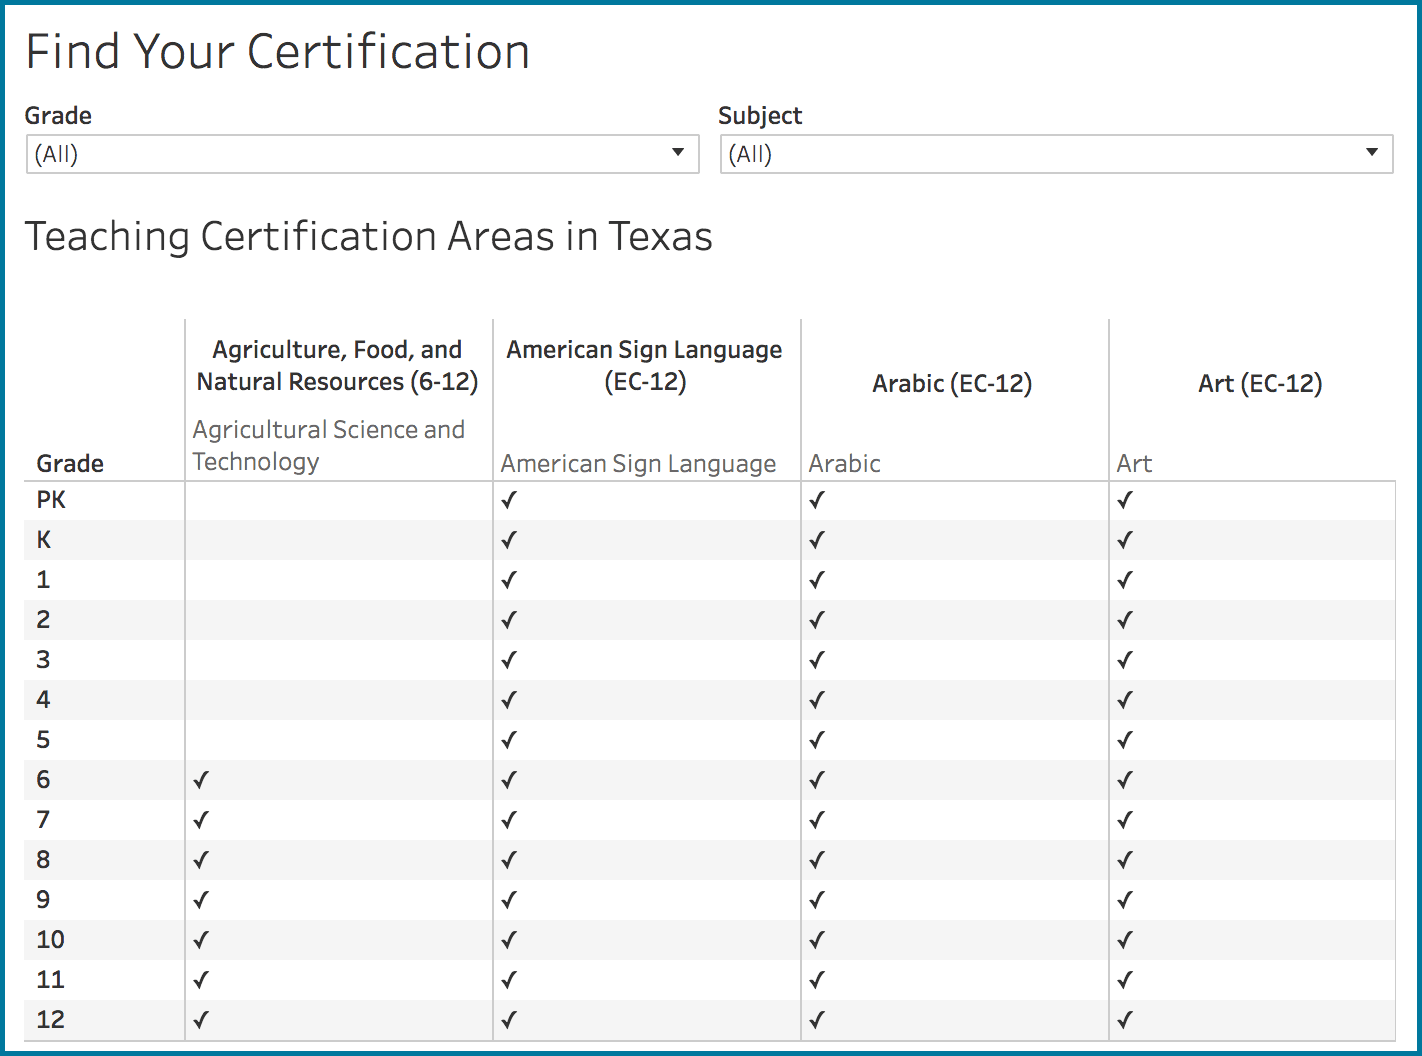 A screenshot of the Texas Teaching Certification Areas tool shows some of the certification areas available for Texas teachers (Agriculture, Food, and Natural Resources; American Sign Language; Arabic; and Art), as well as the grades each certification covers.